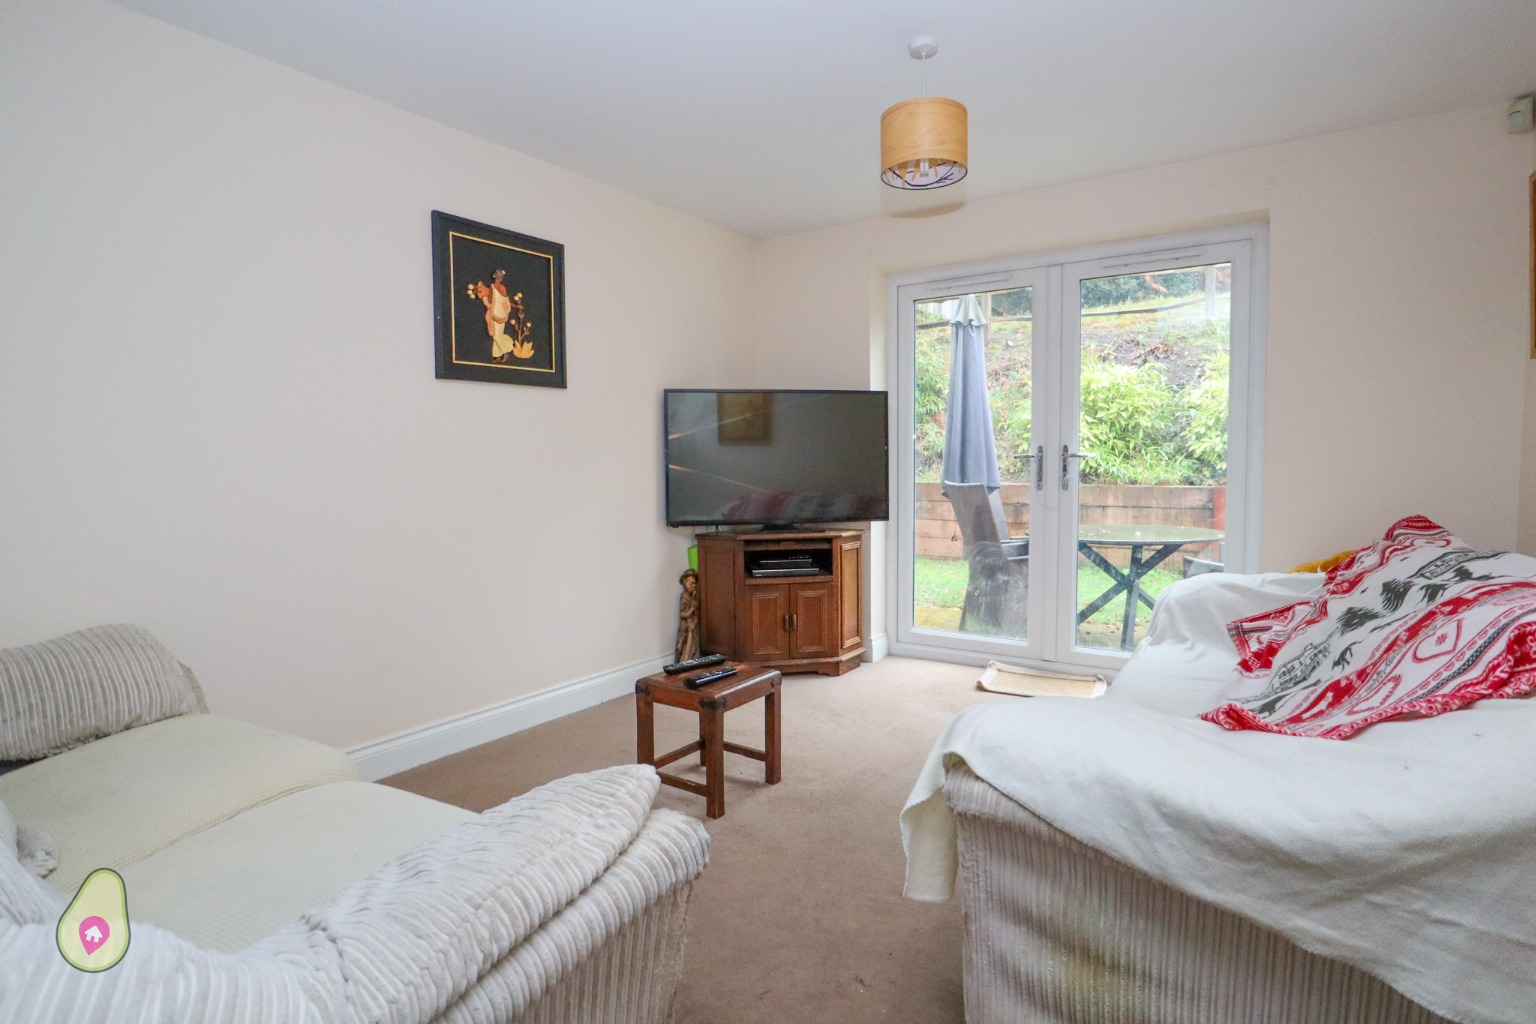 4 bed detached house for sale  - Property Image 3